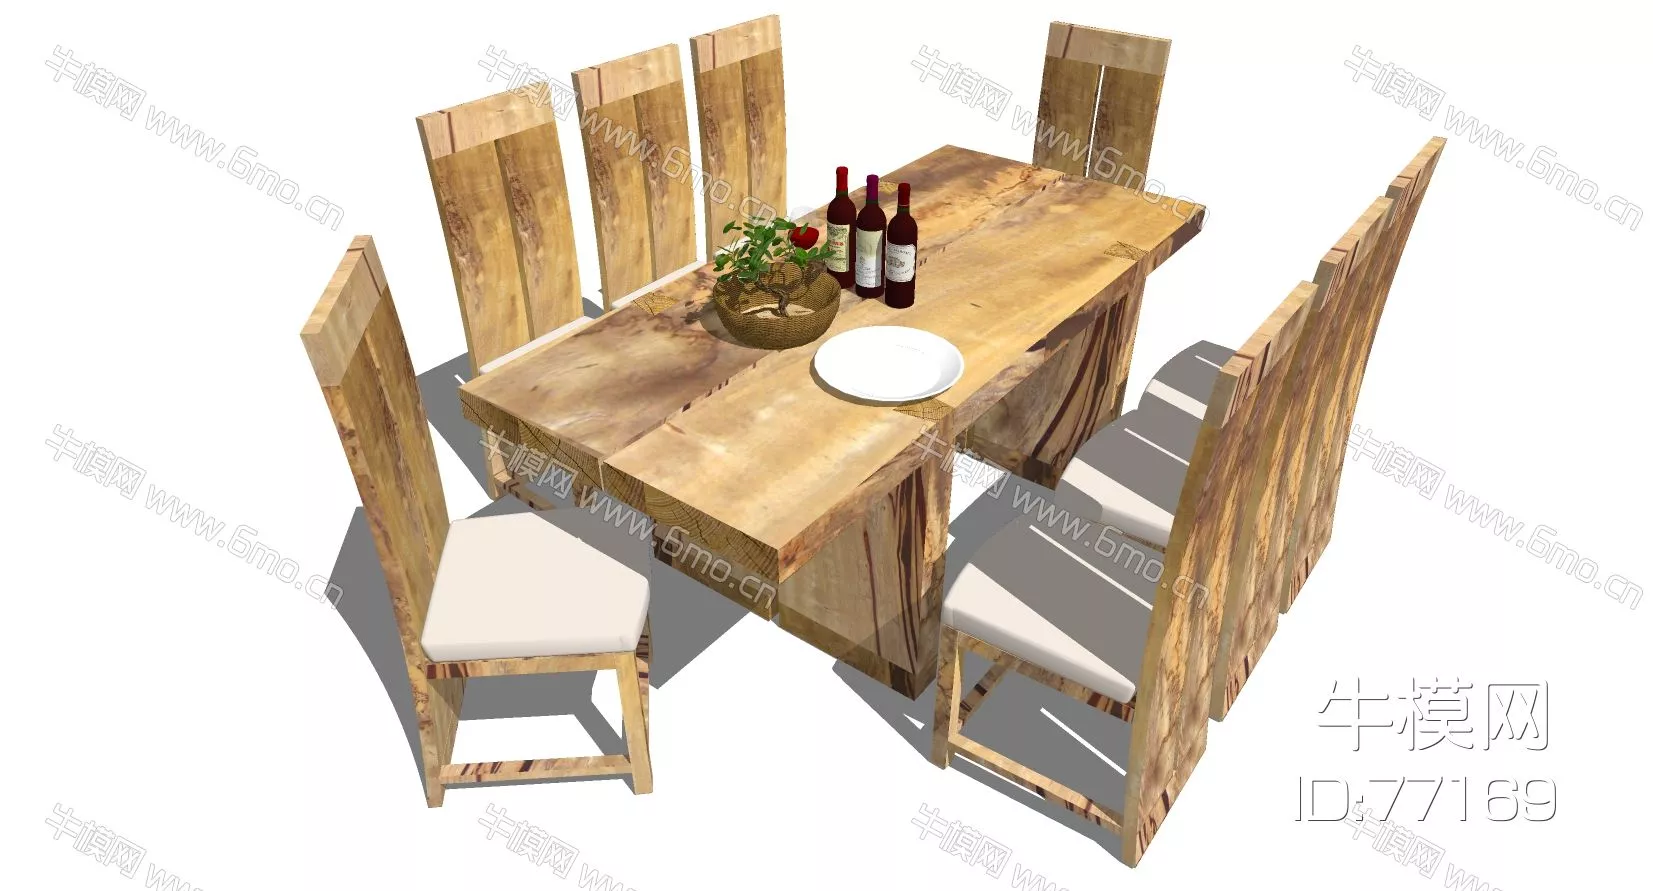 CHINESE OUTDOOR TABLE SET - SKETCHUP 3D MODEL - ENSCAPE - 77169